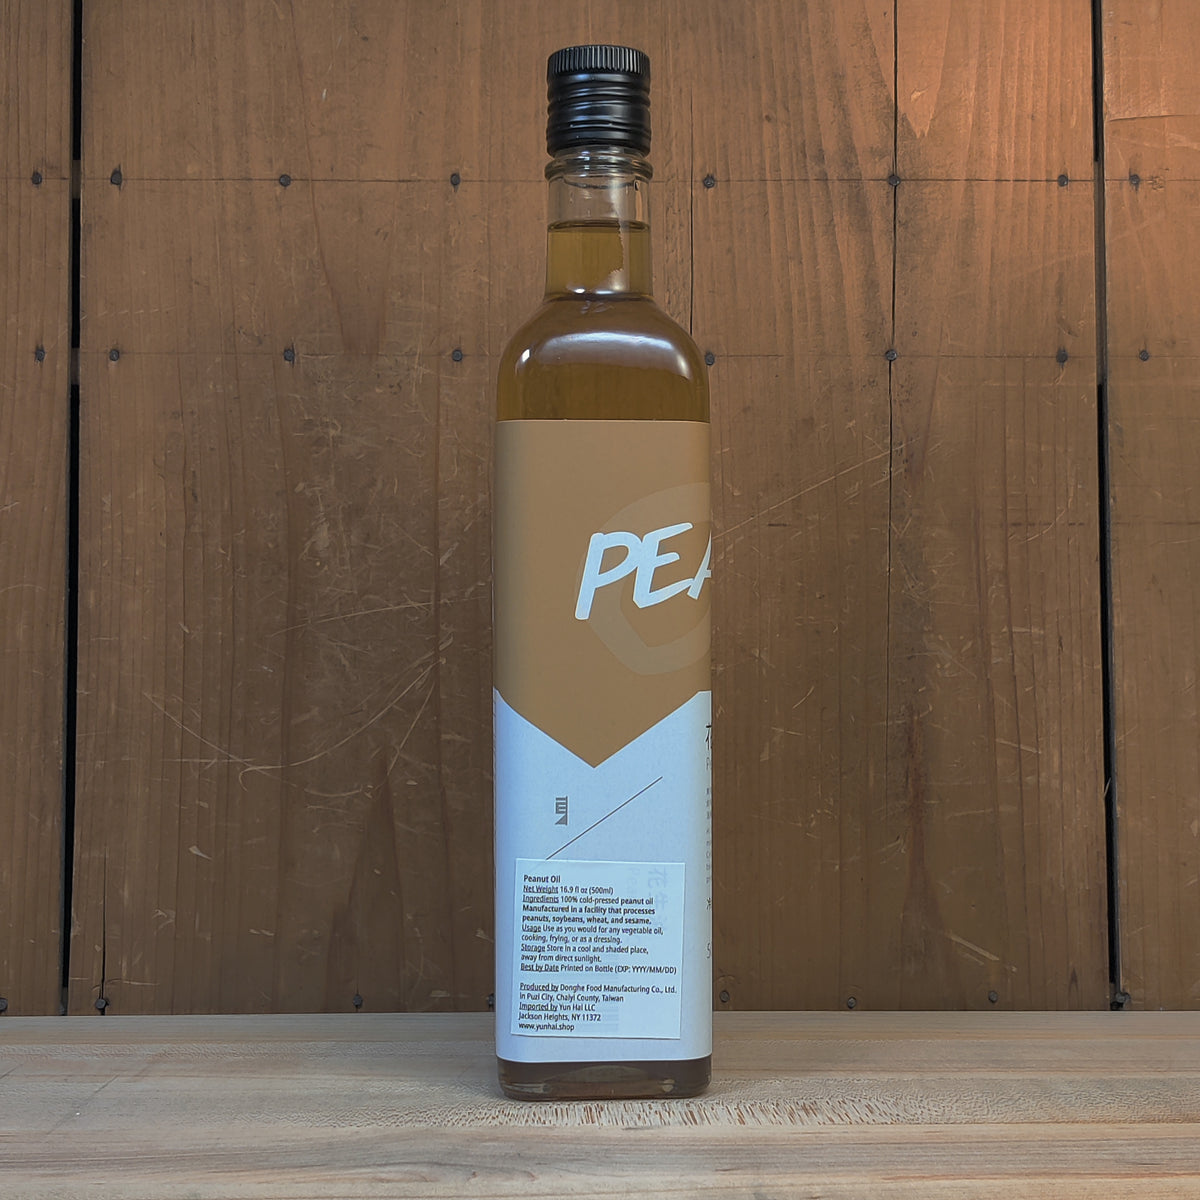 Dong He Cold Pressed Peanut Oil - 500ml